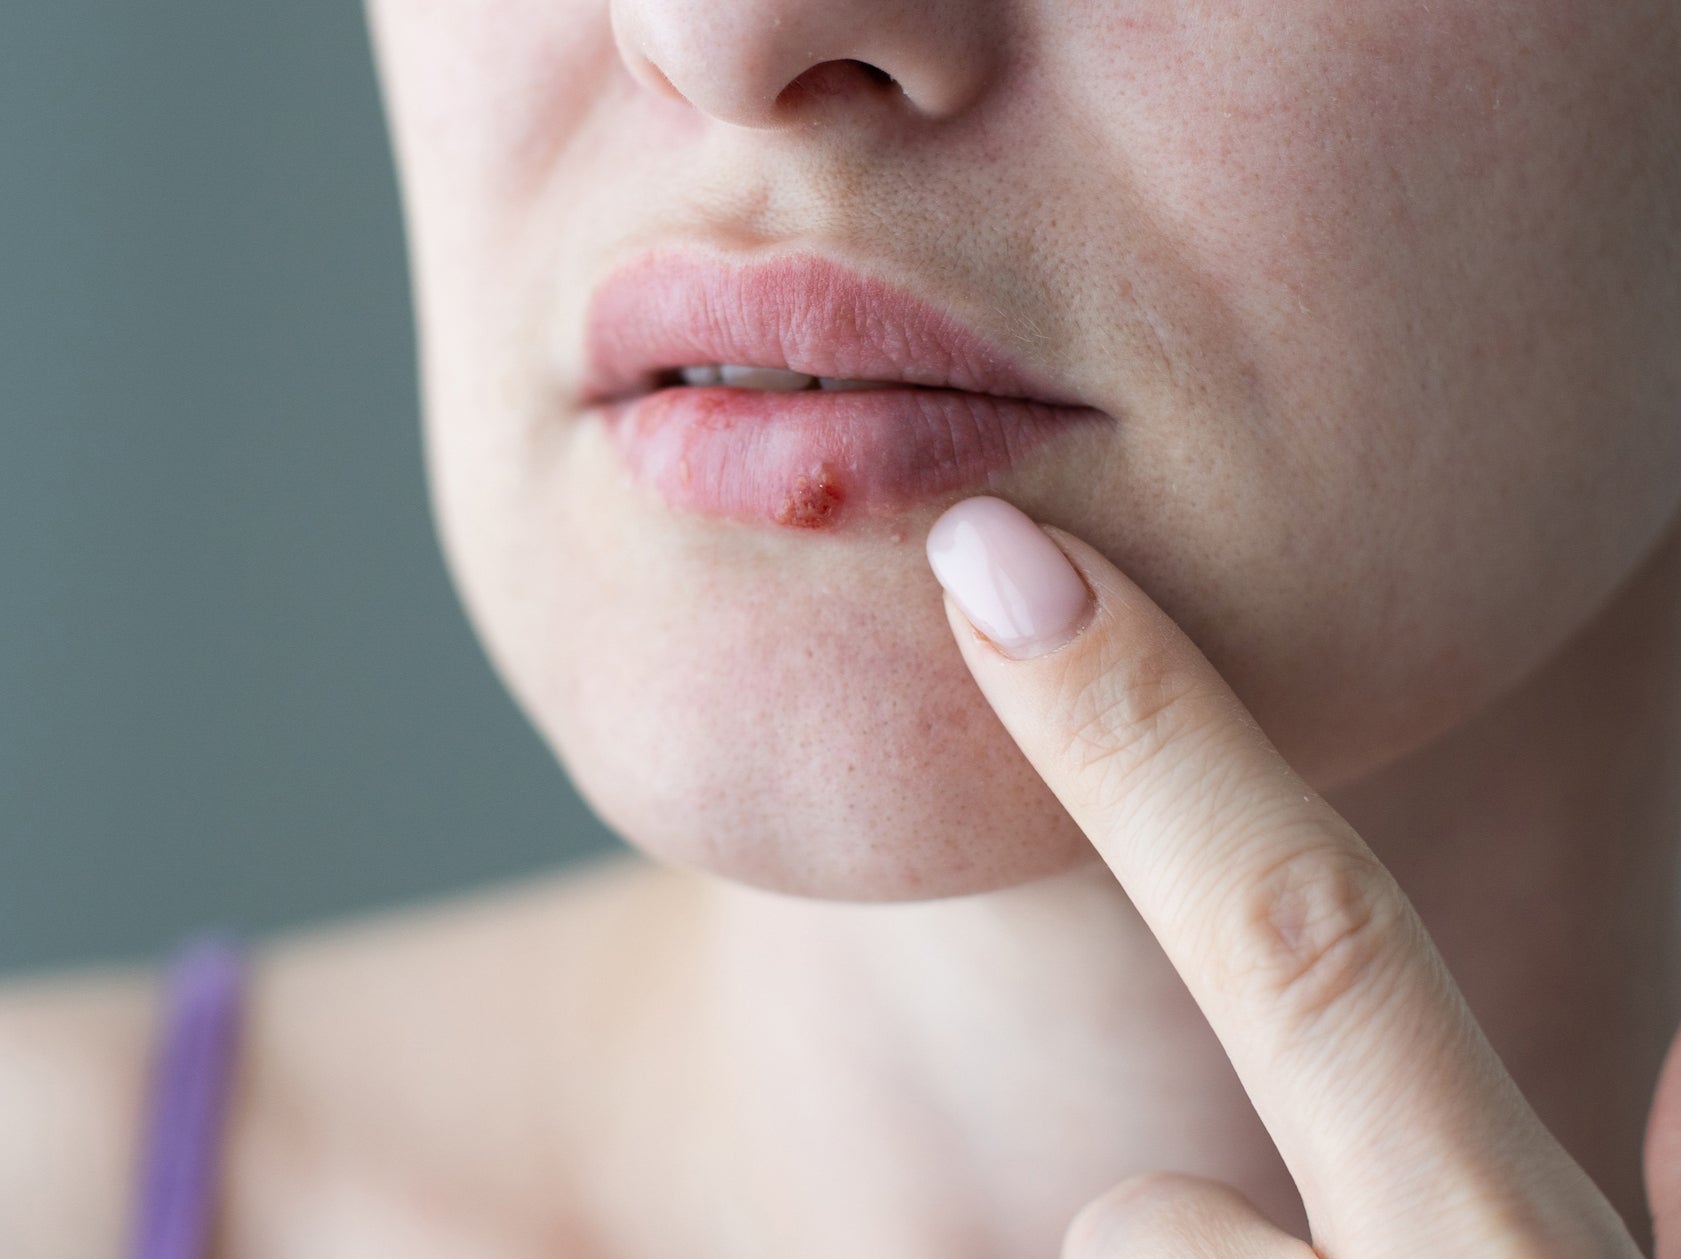 Cold sores are caused by the herpes virus